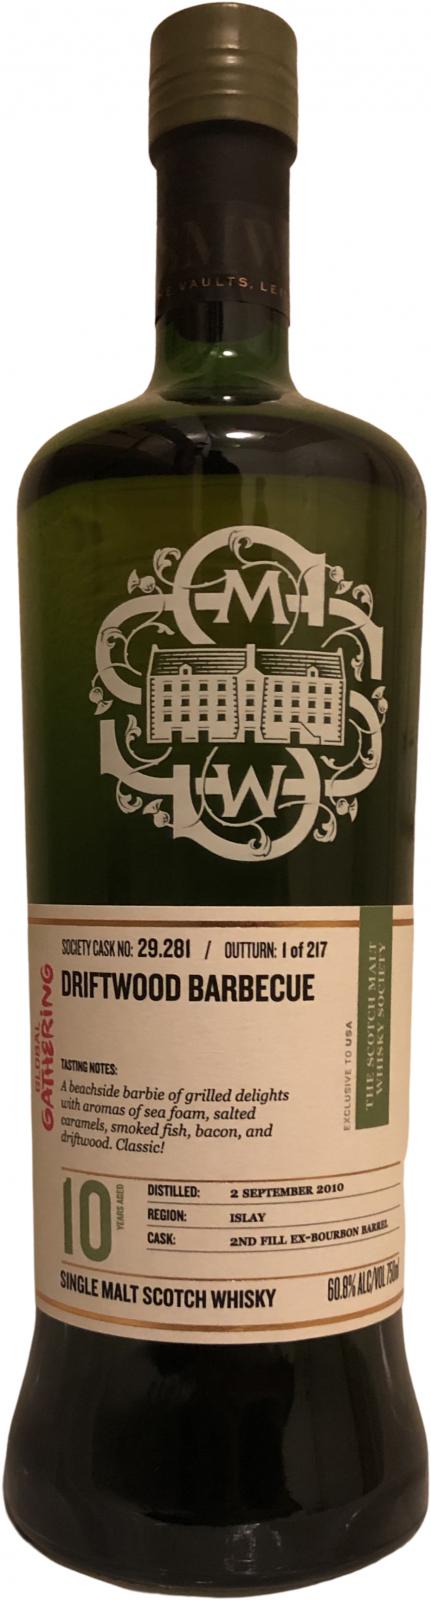 Laphroaig 2010 SMWS 29.281 Driftwood Barbecue Second Fill Bourbon Barrel The Global Gathering 2021 60.8% 750ml